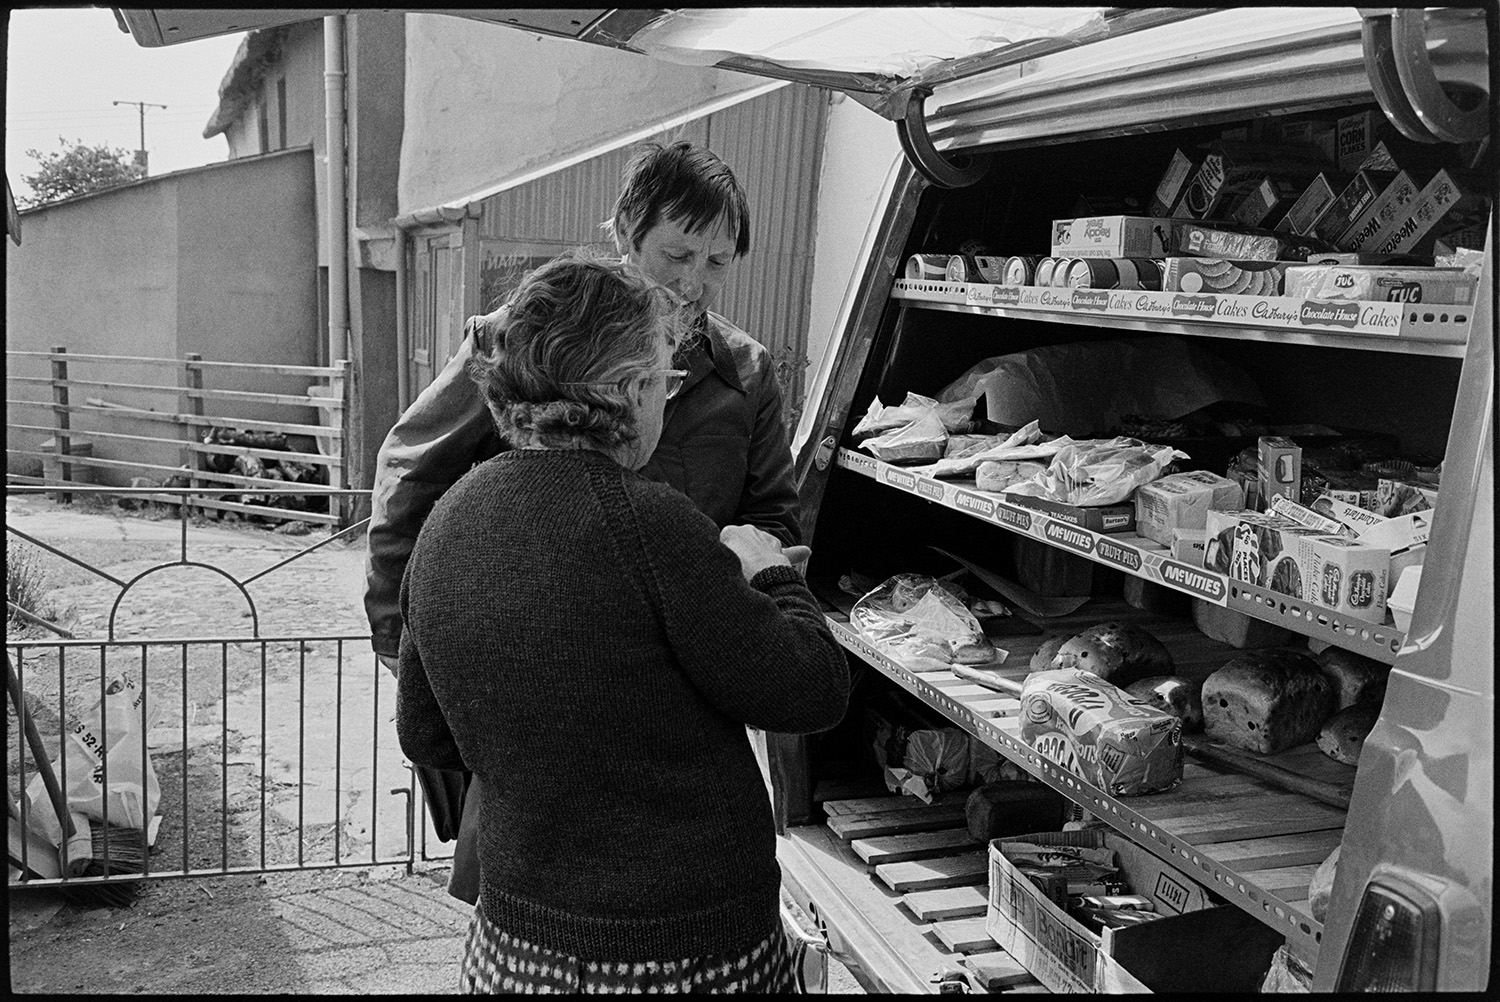 Women buying food from mobile grocers van. <br />
[Miss Audrey Bowden buying items from a Grocer's van in a street in Kings Nympton. She is paying a man. Items on the van include bread, biscuits, cans and scones.]